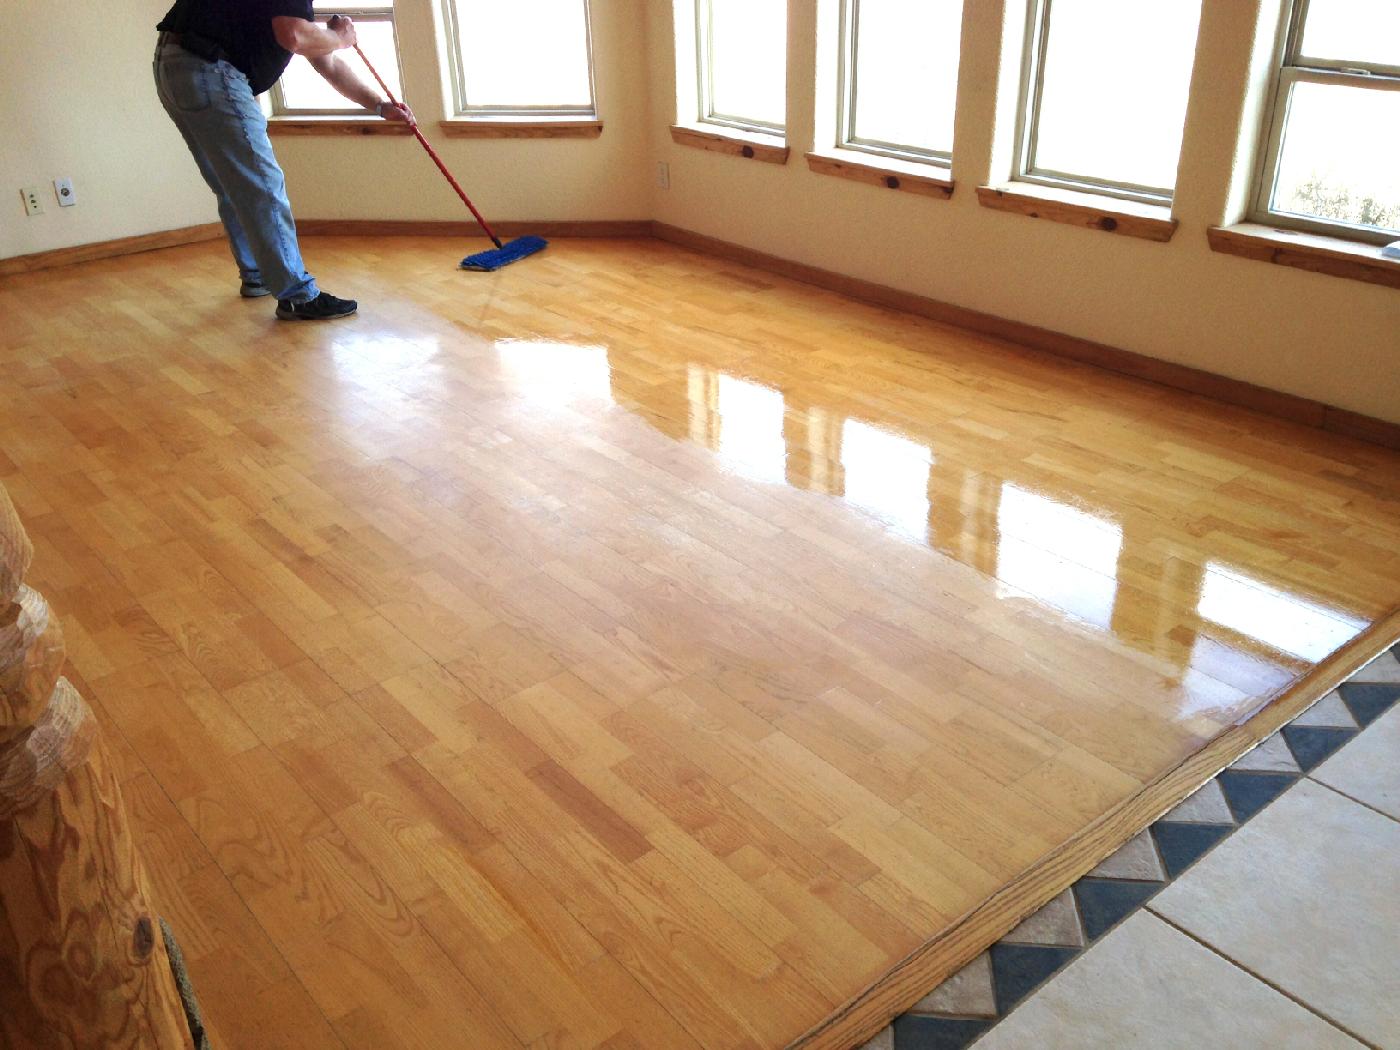 Solid Wood Floors are Easy to Maintain